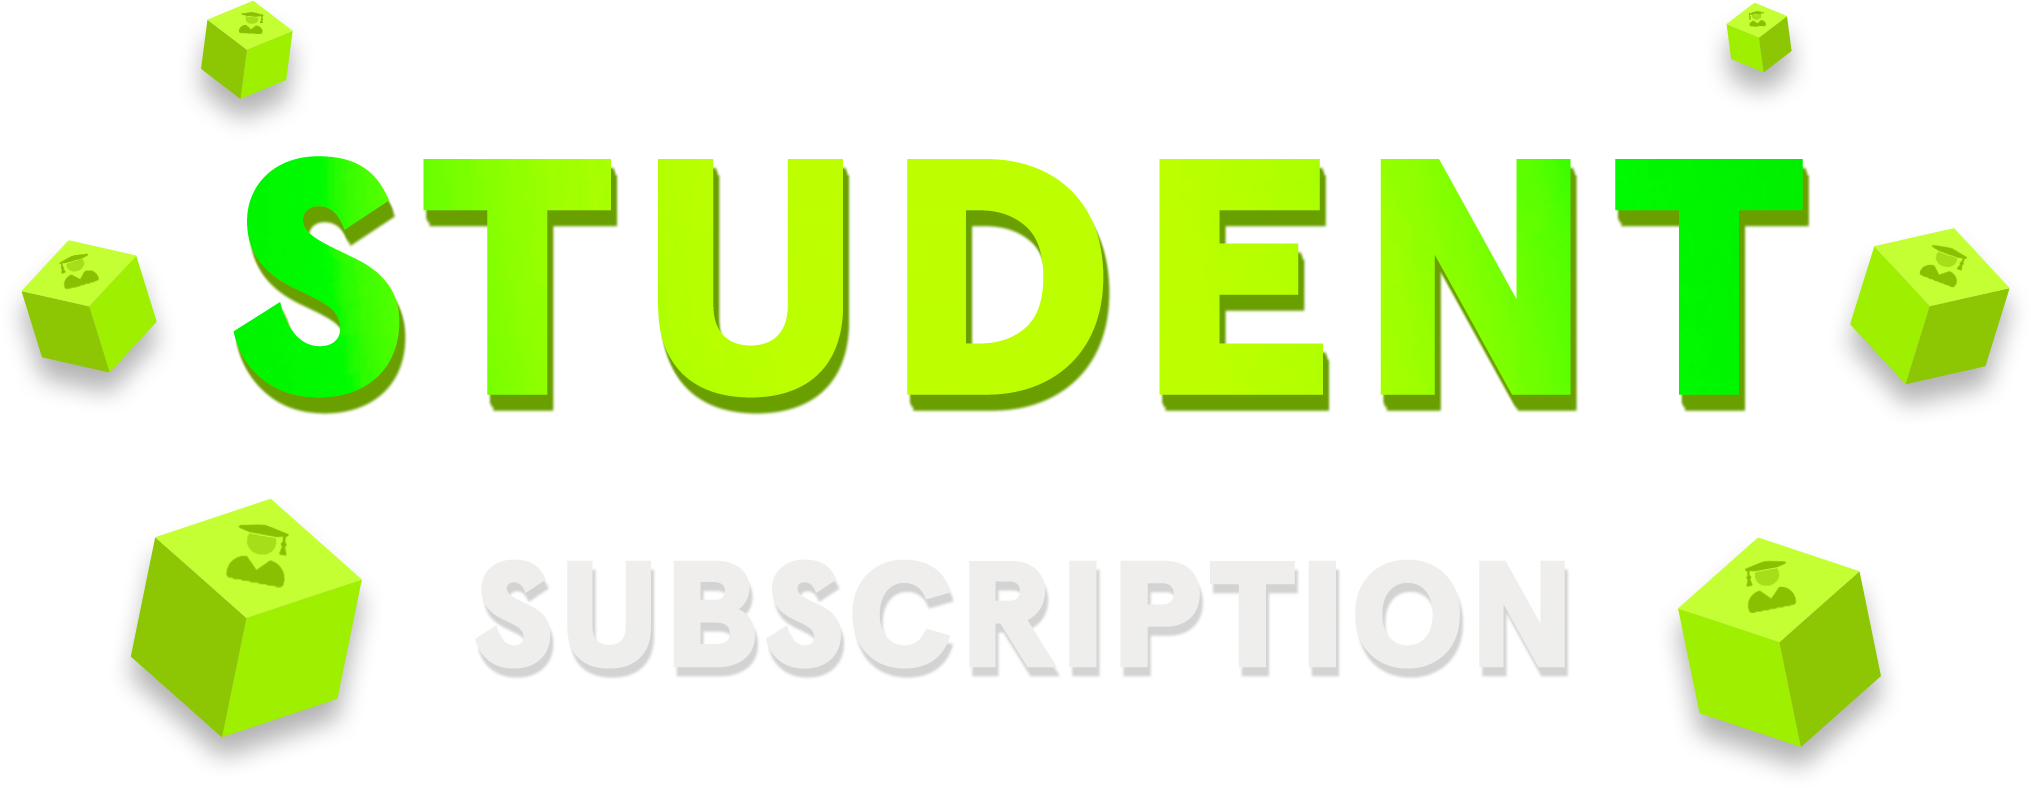 The \"Student Sub\" for HTB Academy has landed!